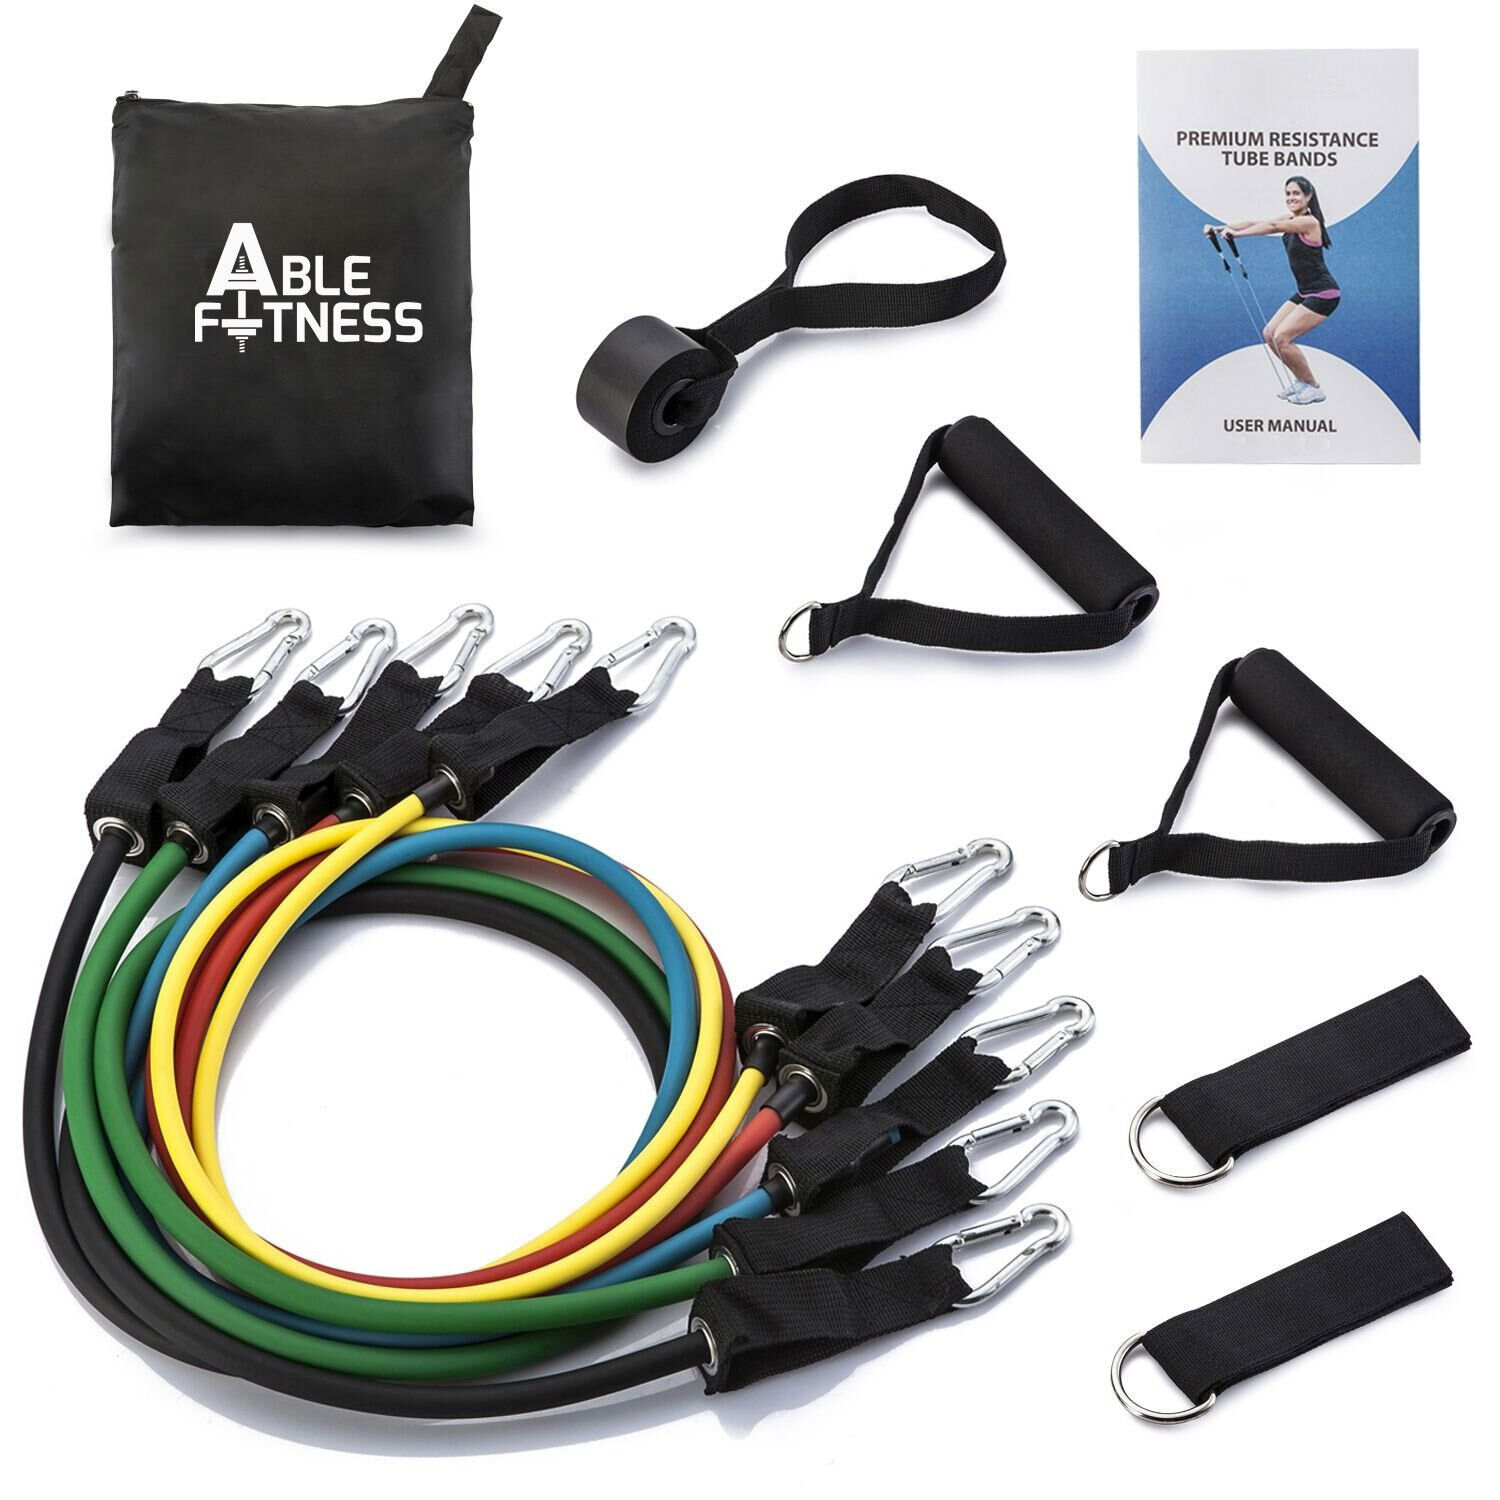 5 EXERCISE RESISTANCE BANDS CORDS 100 LBS SET YOGA PILATES WORKOUT FITNESS able fitness able-5bands